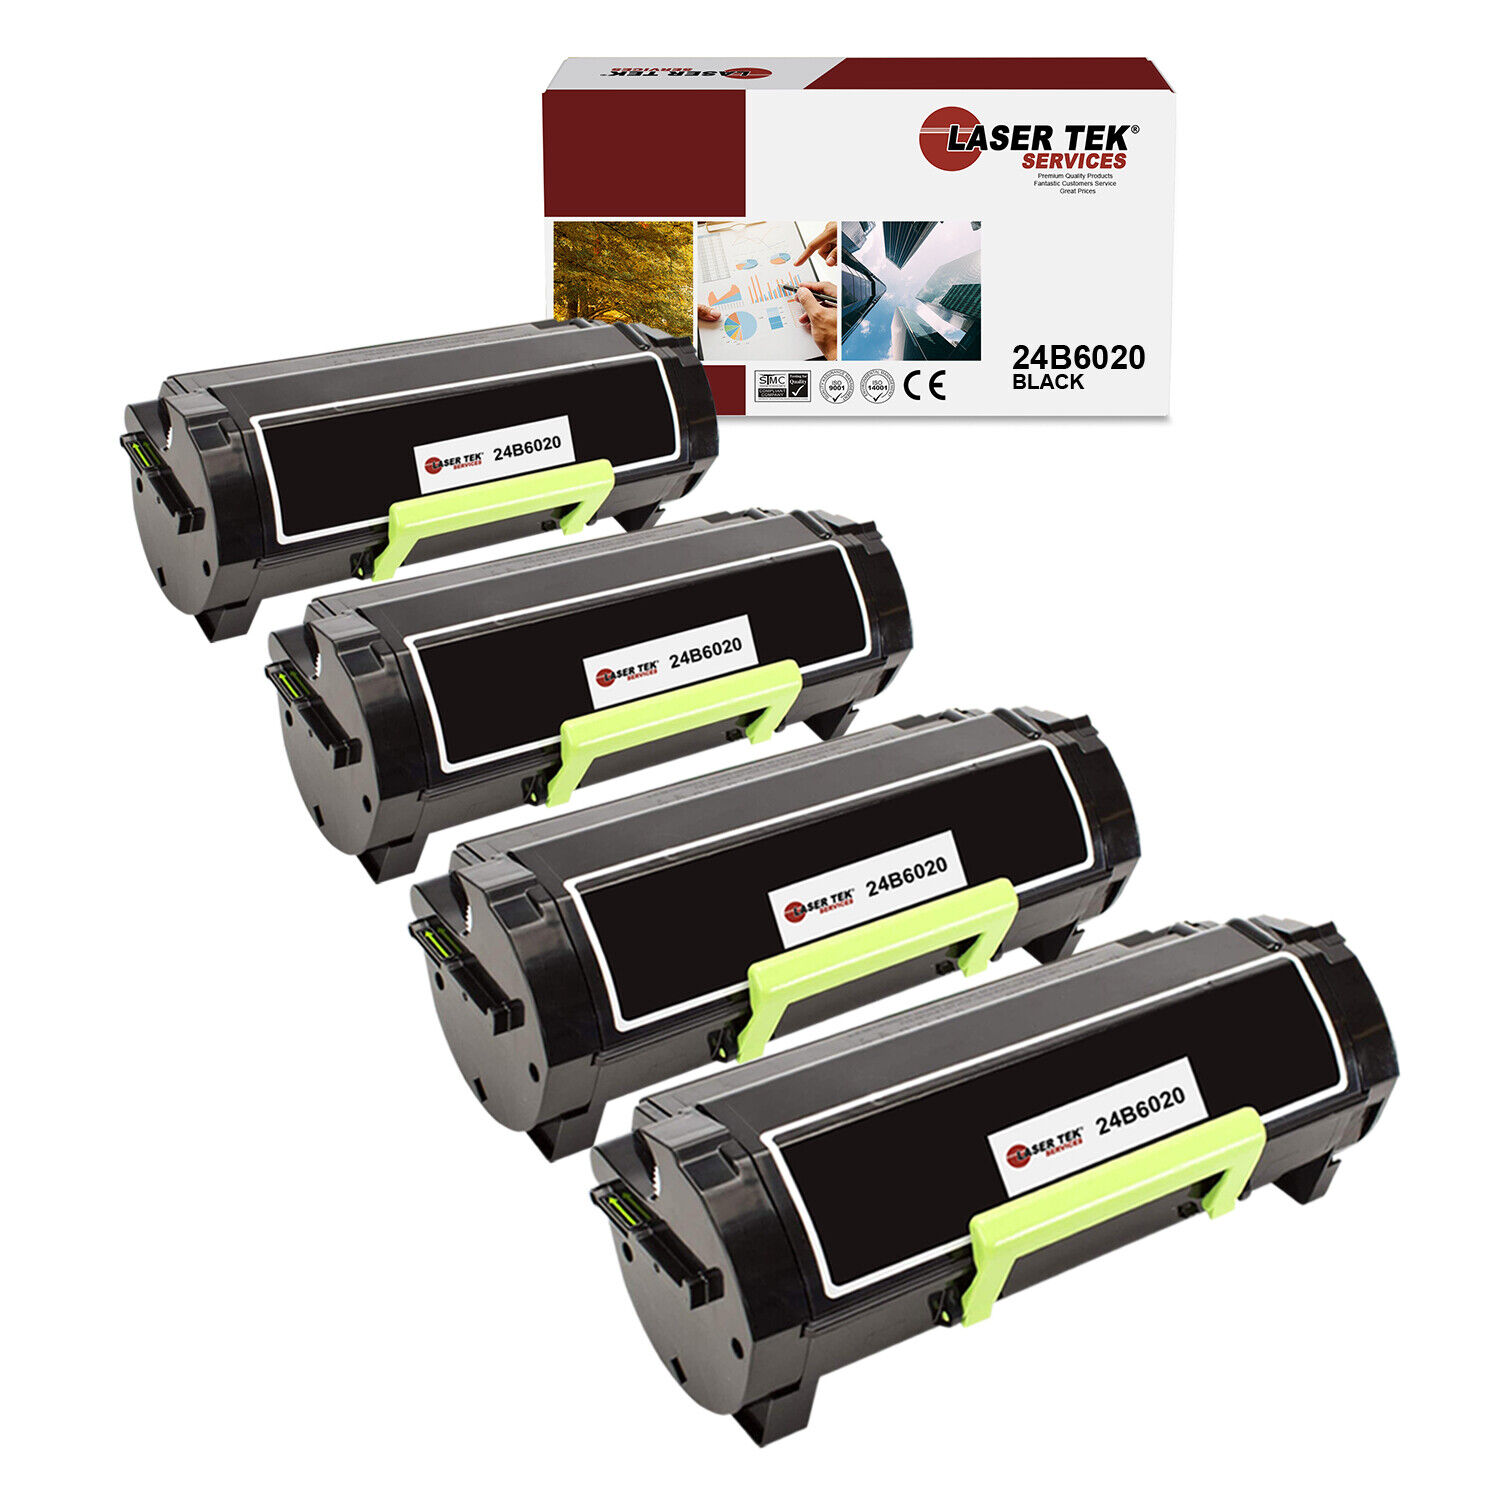 Hp Q7561A Cyan Compatible Toner Cartridge 3500 Page Yield with Chip